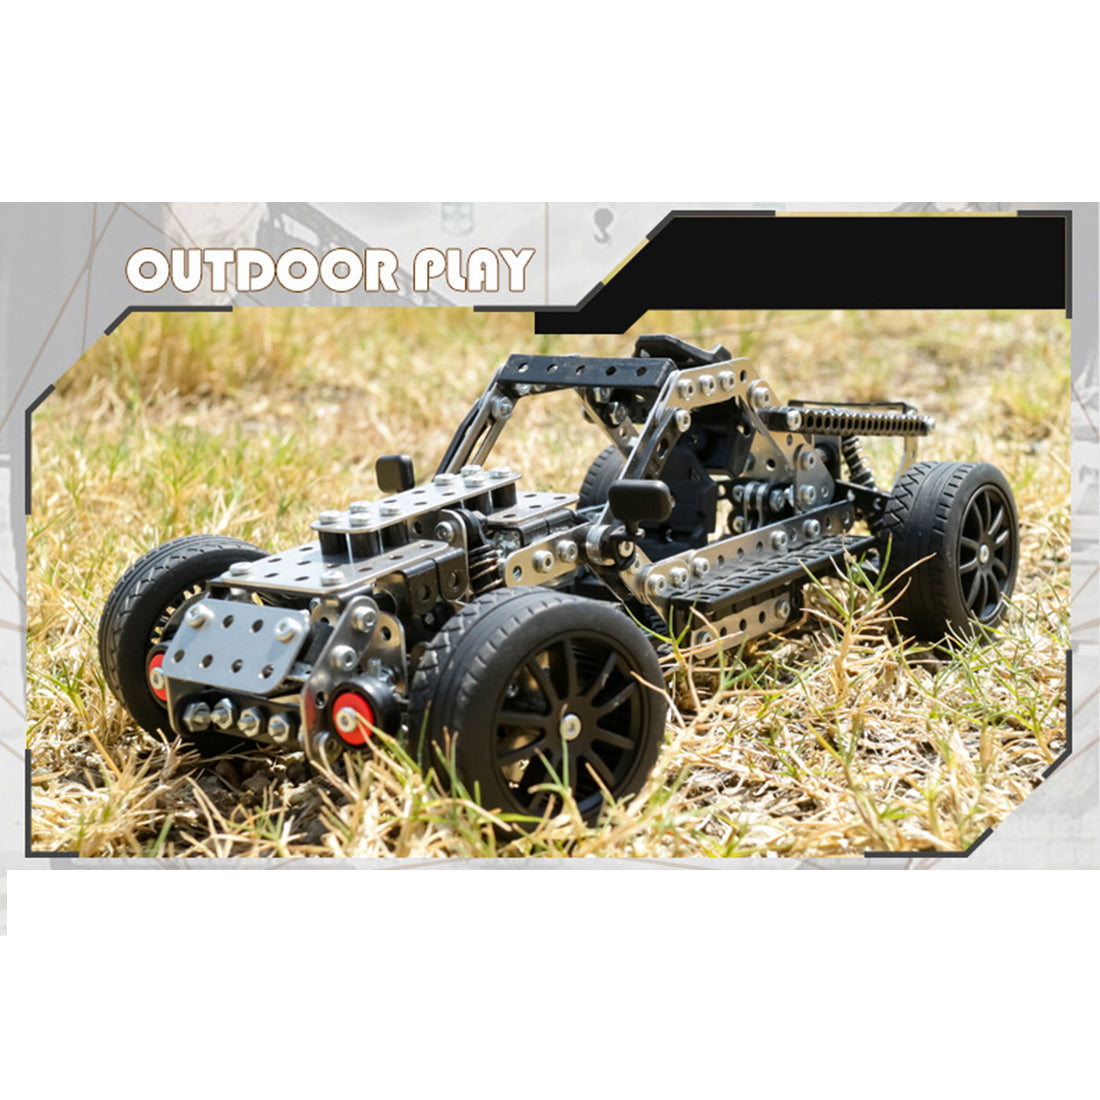 618Pcs DIY Stainless Steel Assembly Off-road Vehicle Crawler Car Toy Model Building Kit